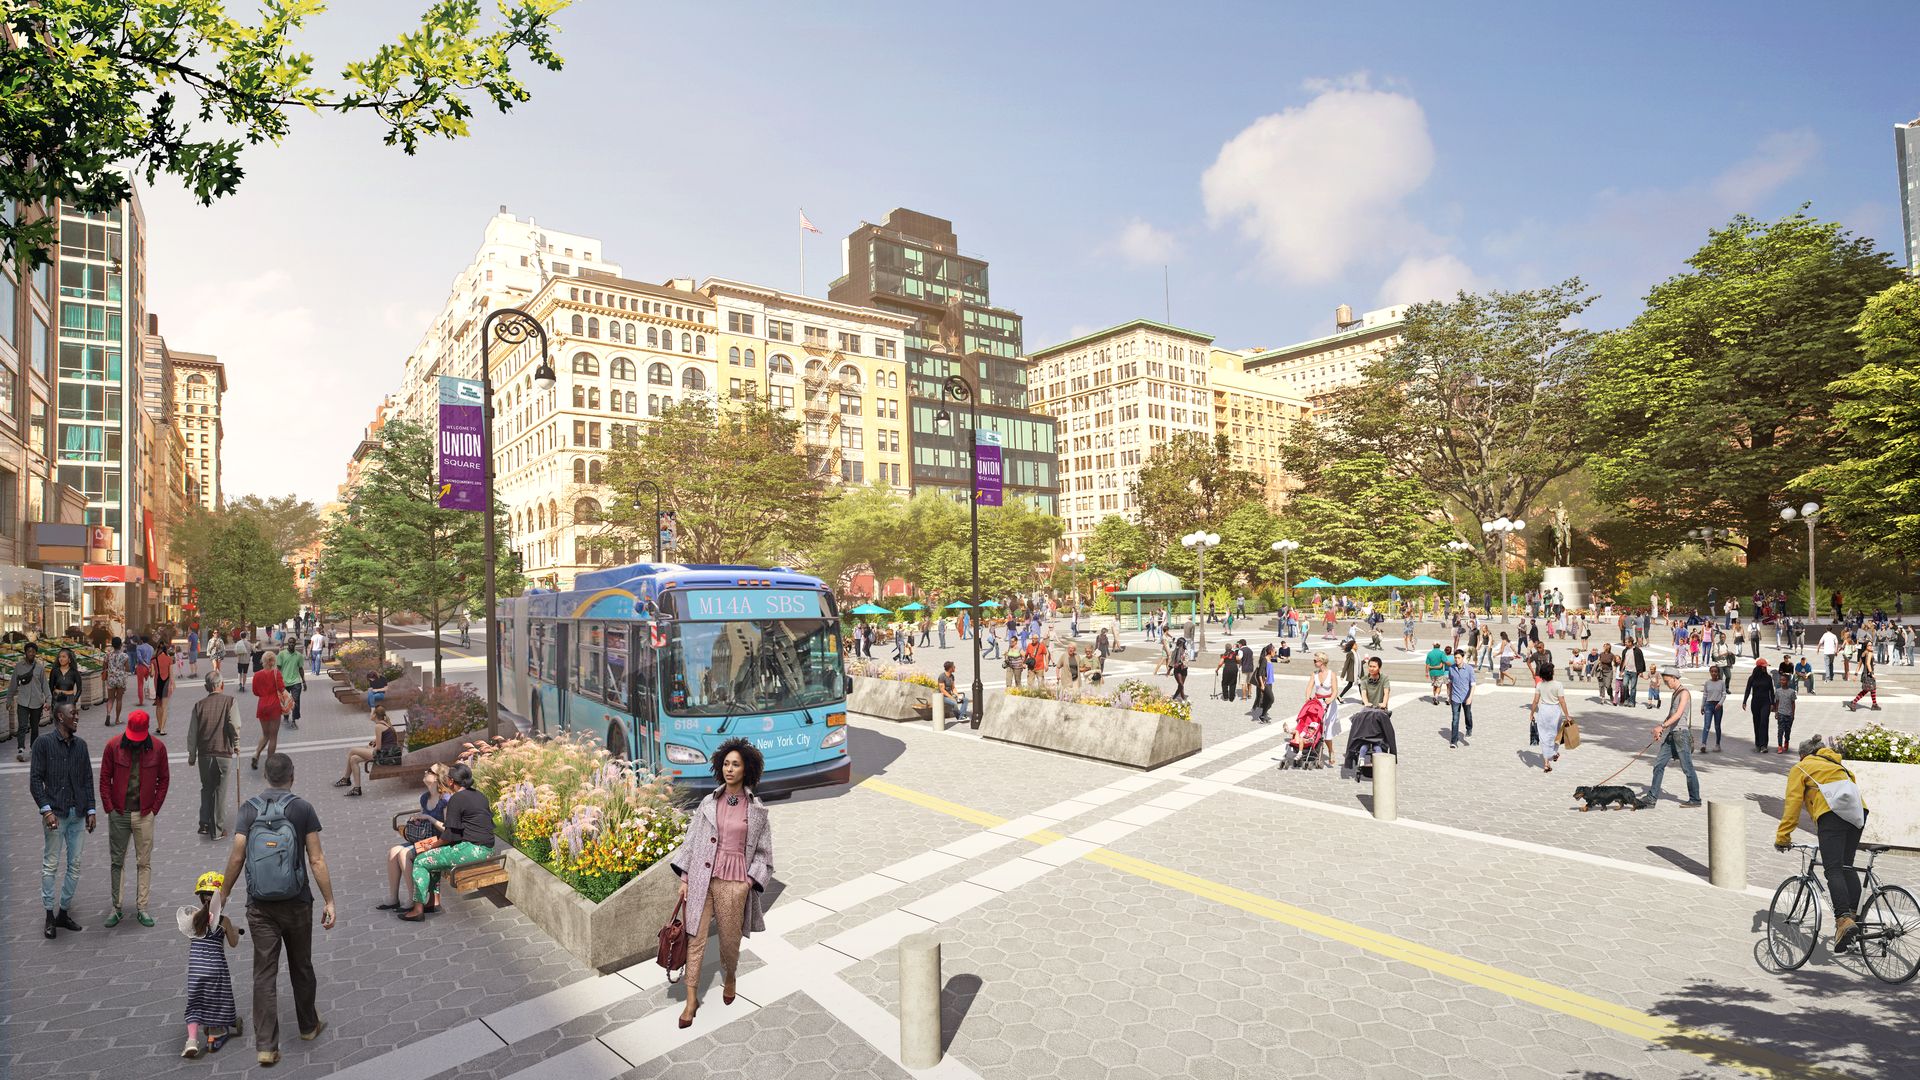 Rendering of what Union Square Park in Manhattan could look like after a renovation